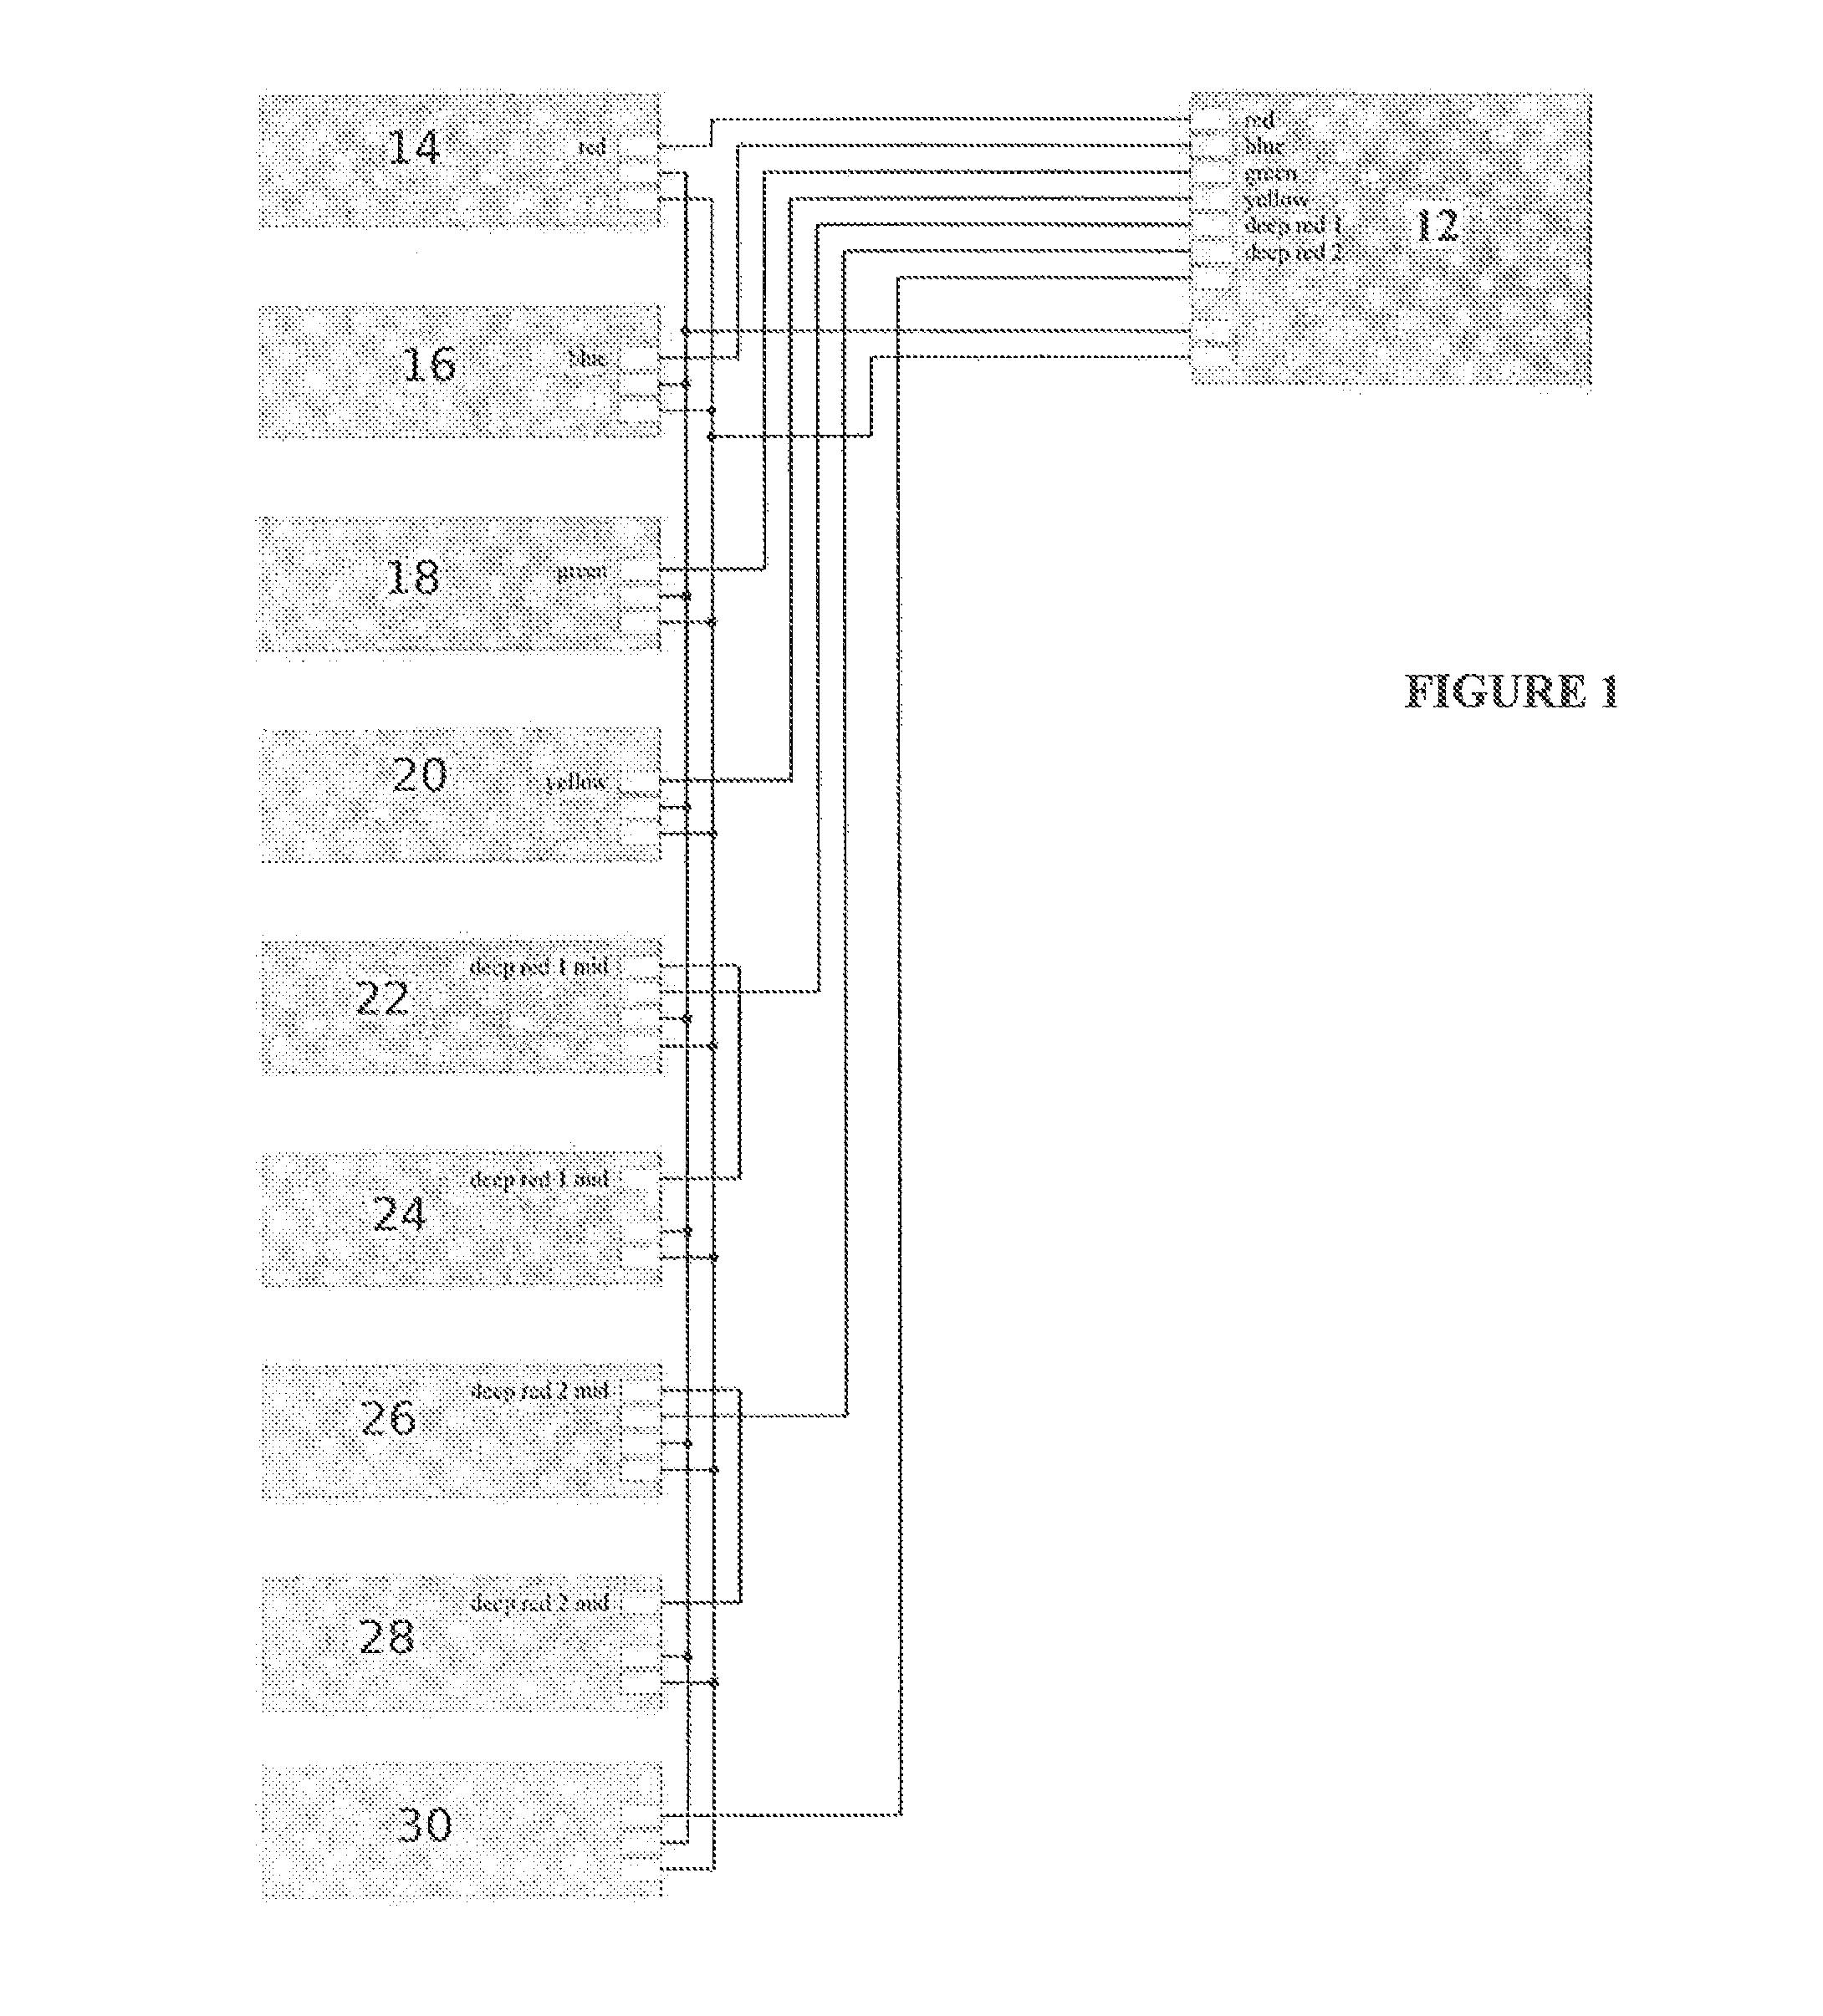 Apparatus and method for plant metabolism manipulation using spectral output